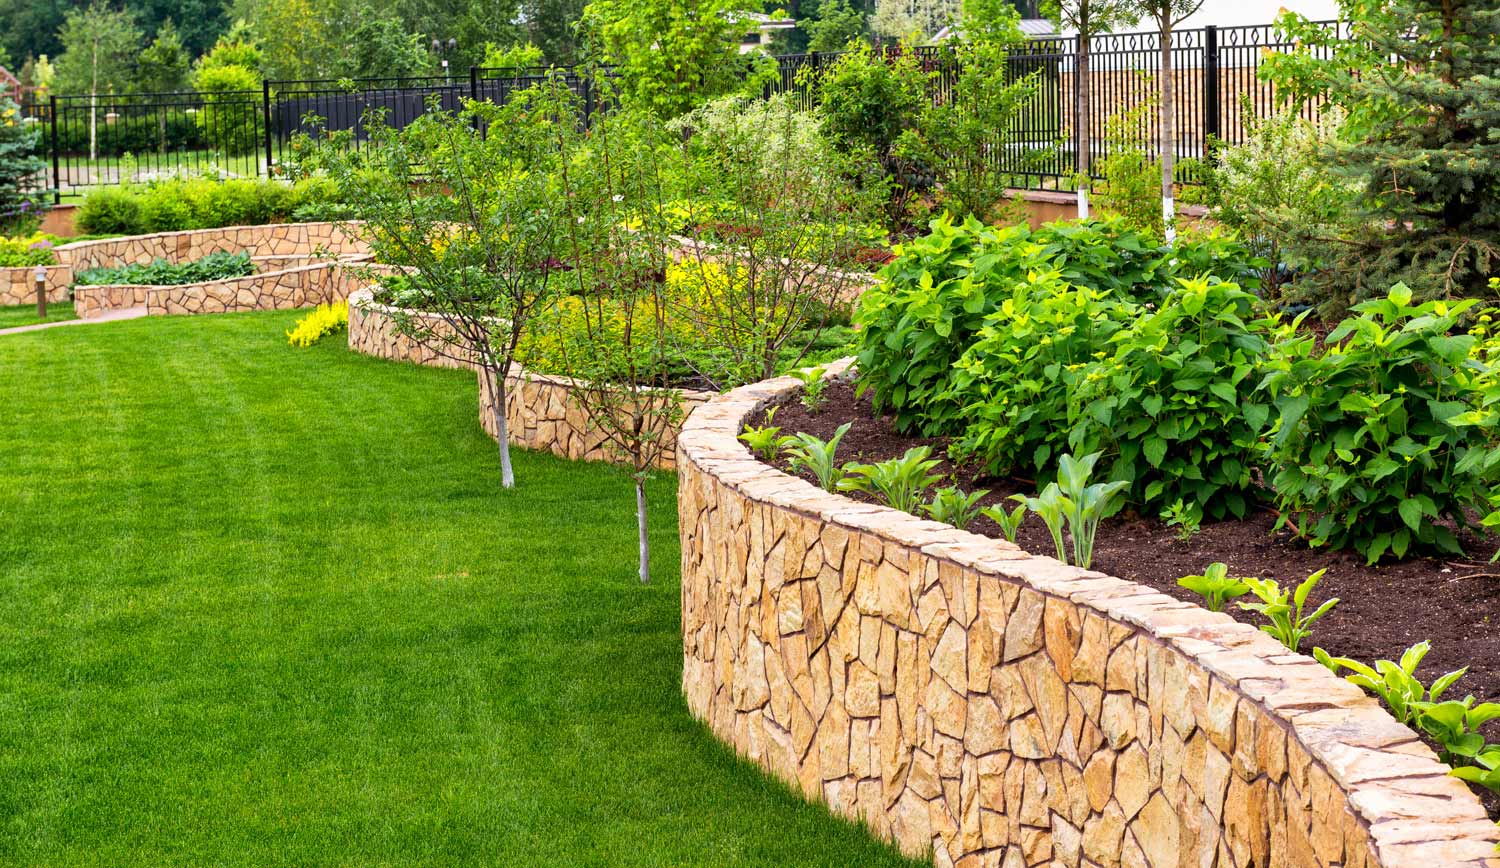 Beautifully manicured landscaping and retaining wall